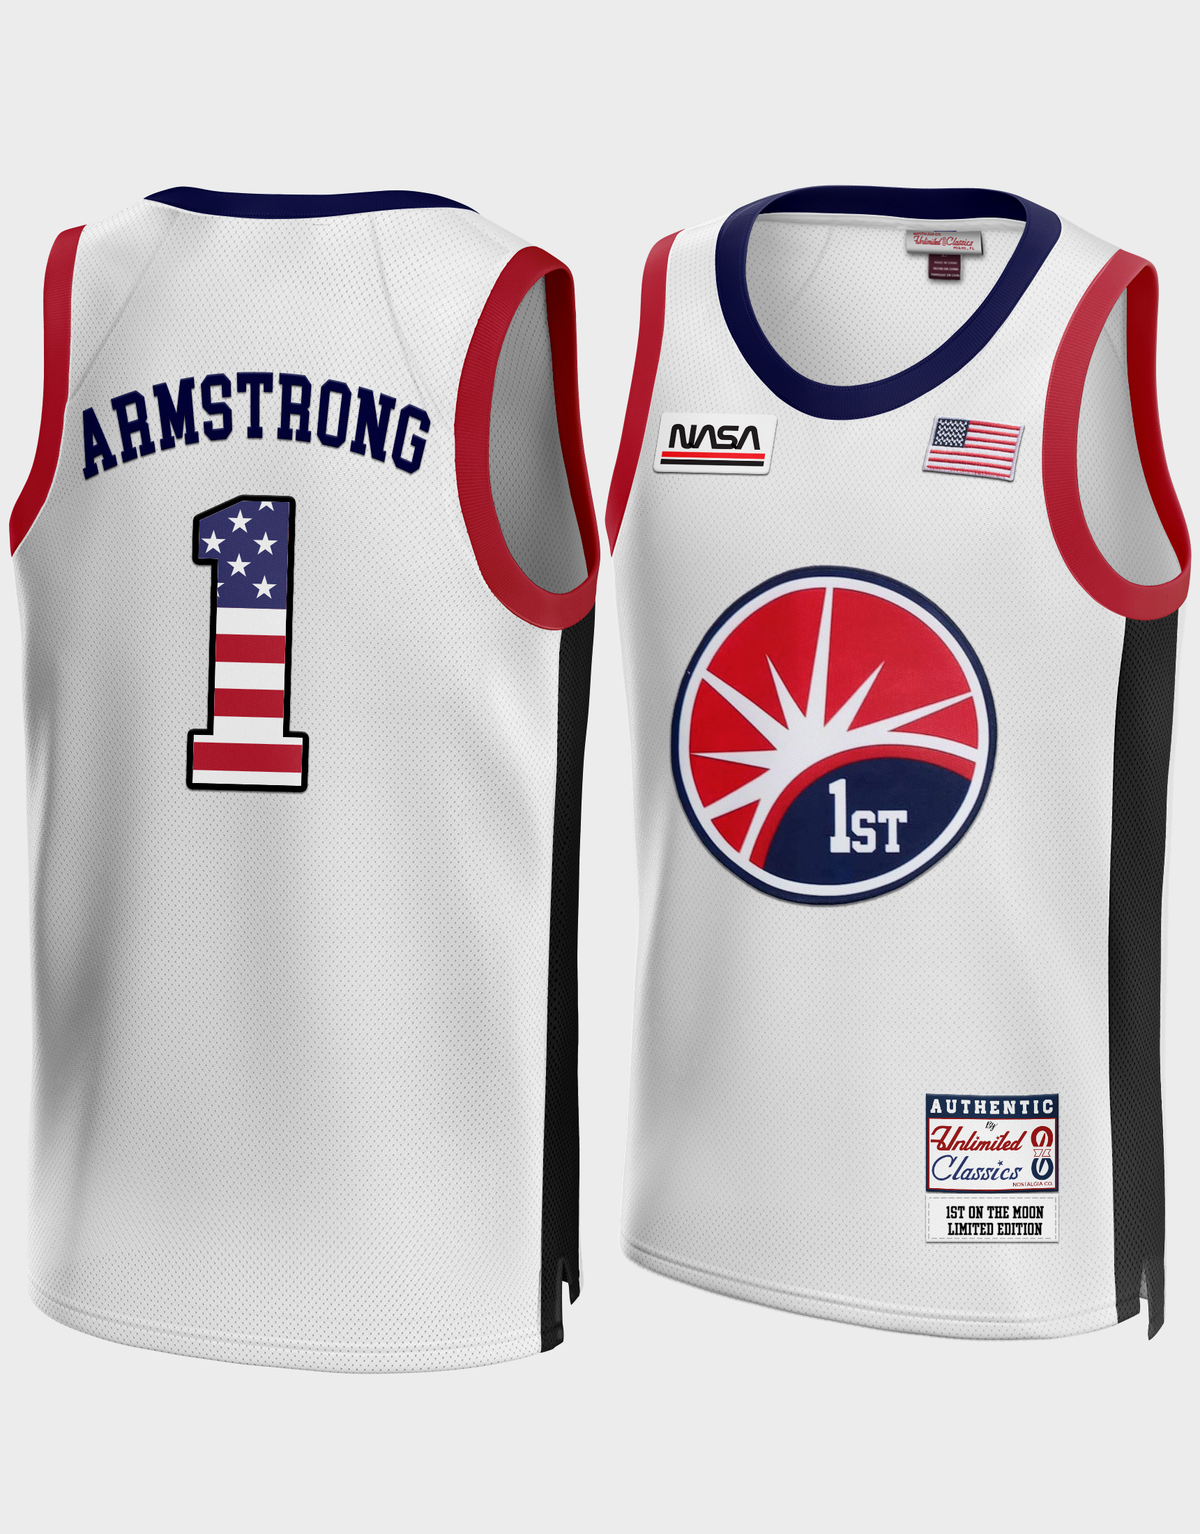 NASA Neil Armstrong #1 Limited Edition Jersey